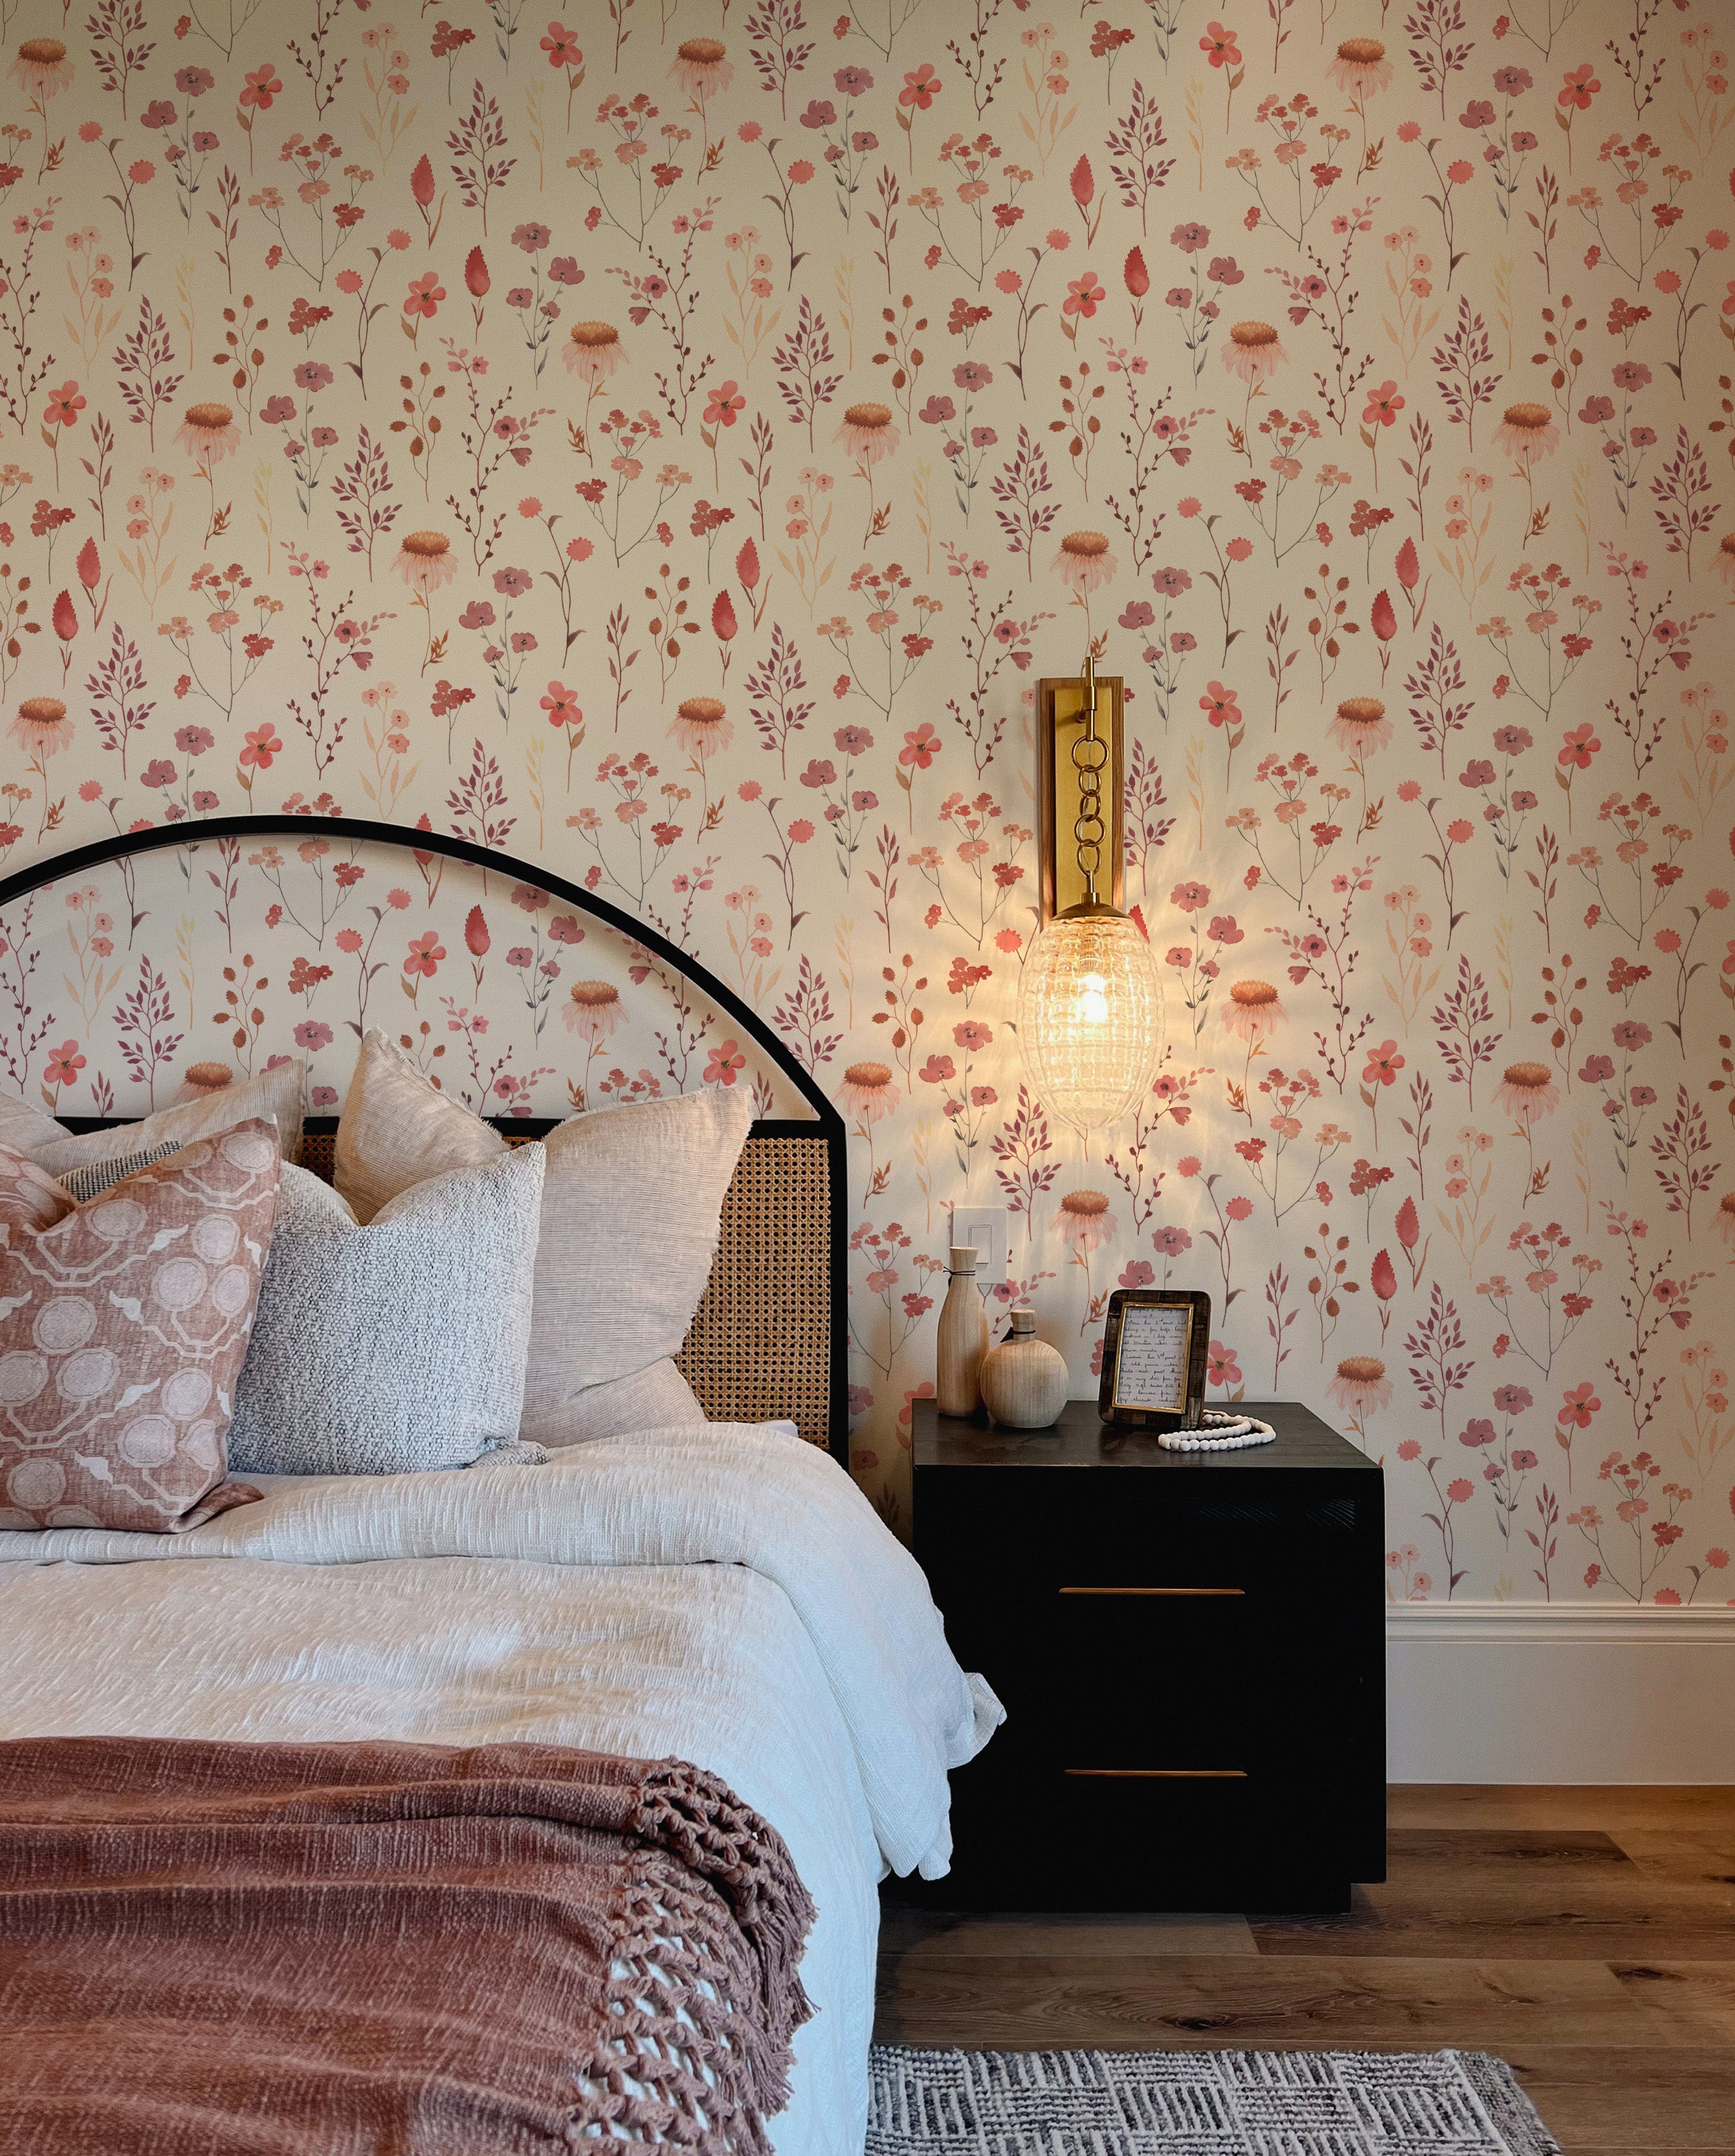 A beautifully appointed bedroom with a wall covered in Blushing Floral Wallpaper, featuring an array of muted pink, red, and purple flowers against a light cream background. The setting includes a bed with a dark metal frame, plush pillows, and a textured throw, complemented by a black nightstand with decorative items.